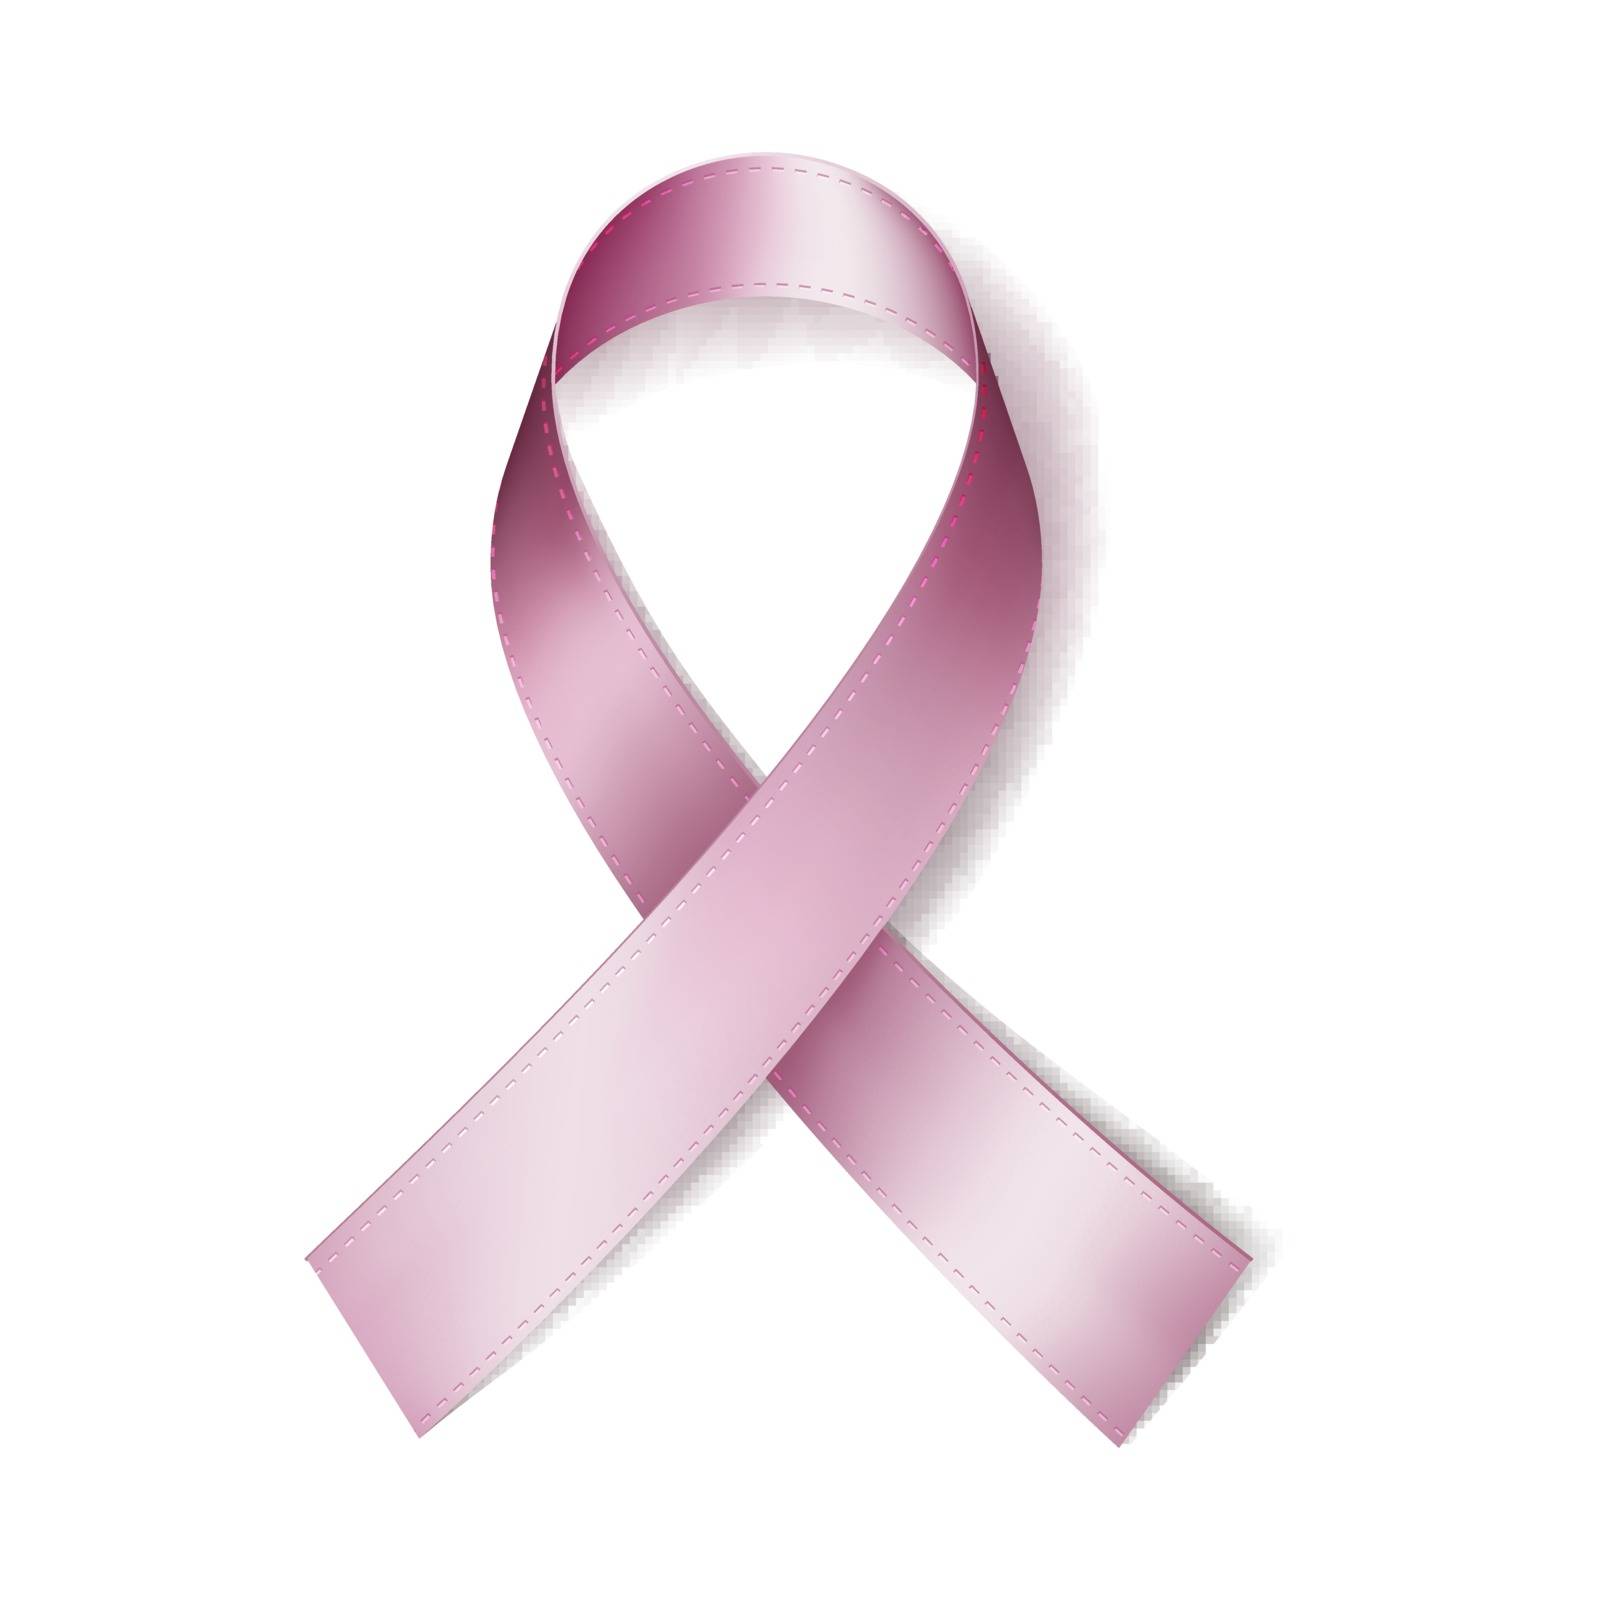 Realistic pink ribbon, isolated on white background. Breast cancer awareness symbol, Fight Against Cancer concept. Vector illustration, eps10.